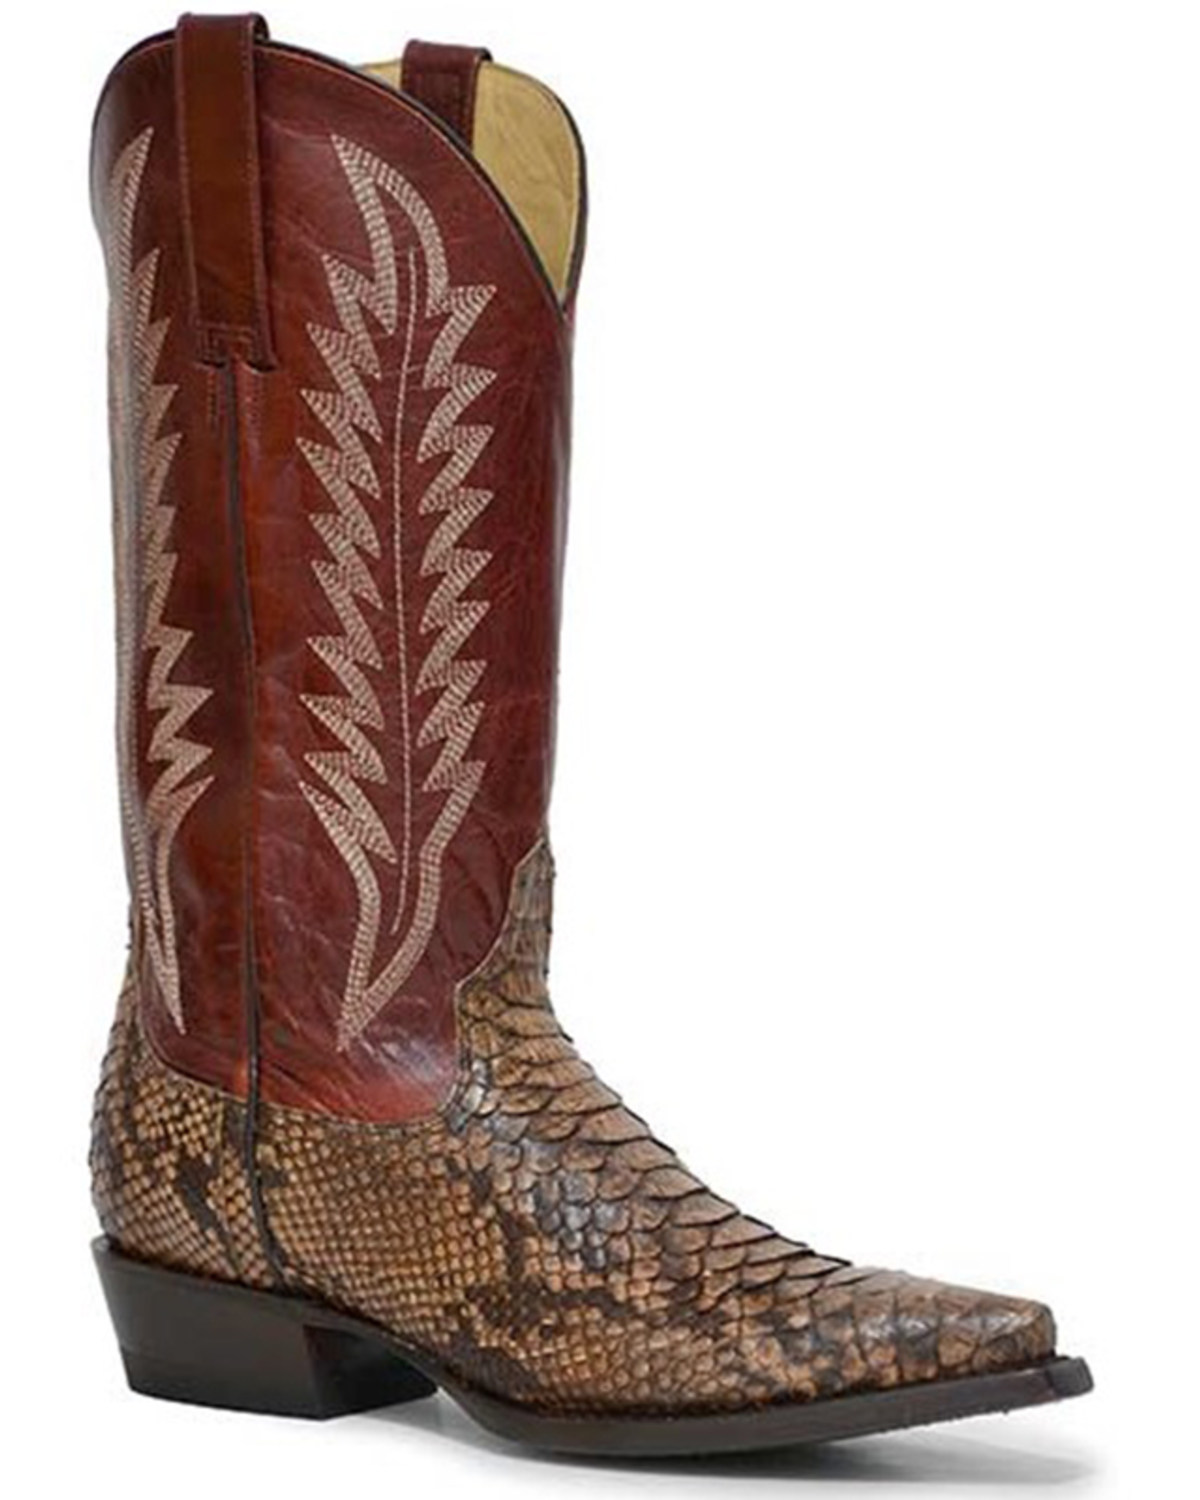 Stetson Women's Ember Exotic Python Western Boots - Snip Toe